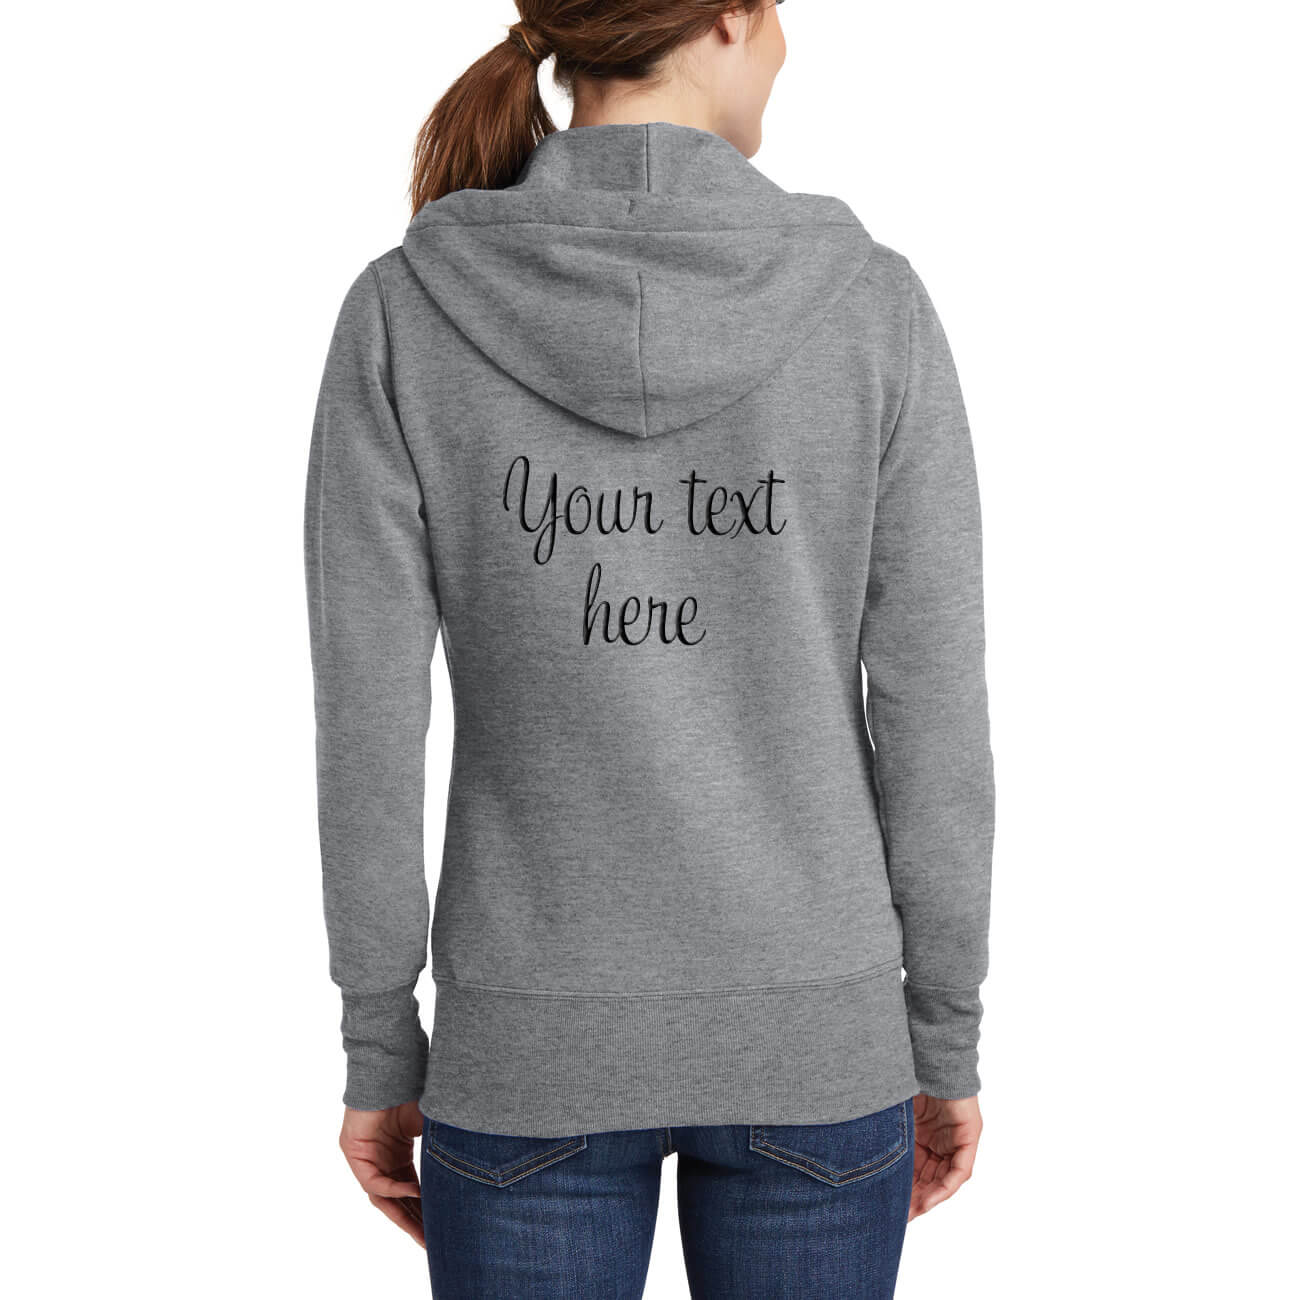 Create Your Own Embroidered Zip Hoodie - Personalized Brides